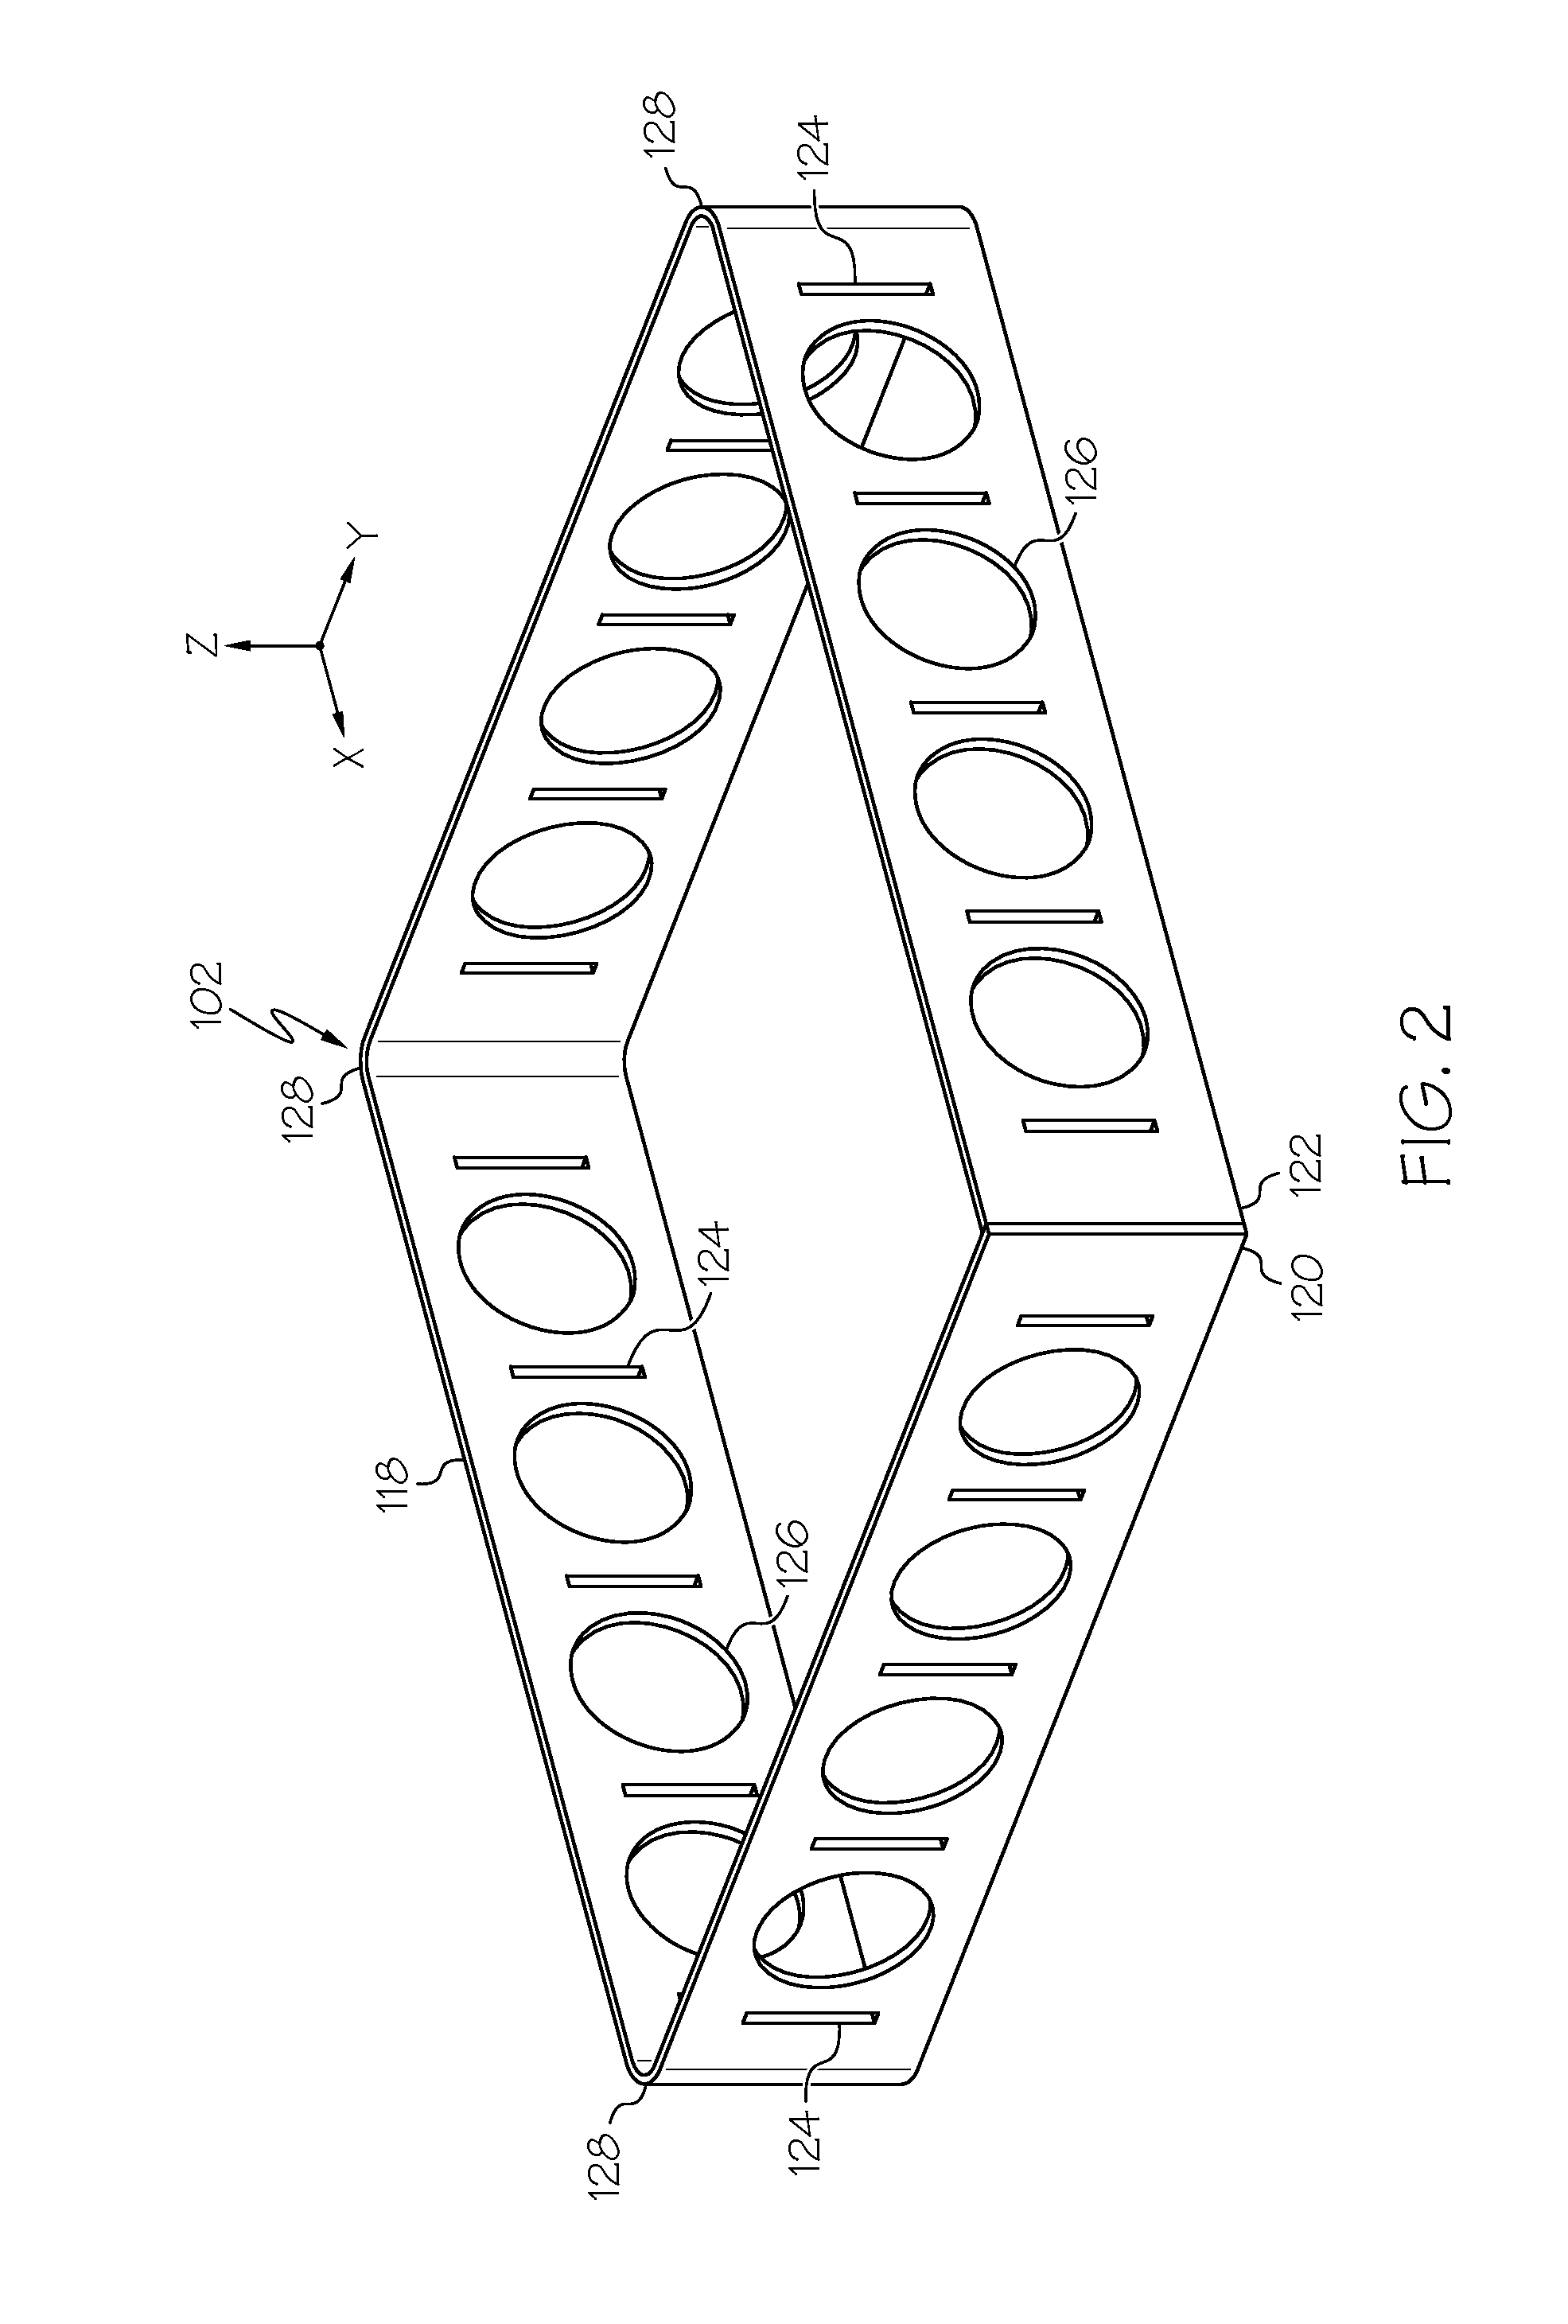 Magazine apparatuses for holding glass articles during processing